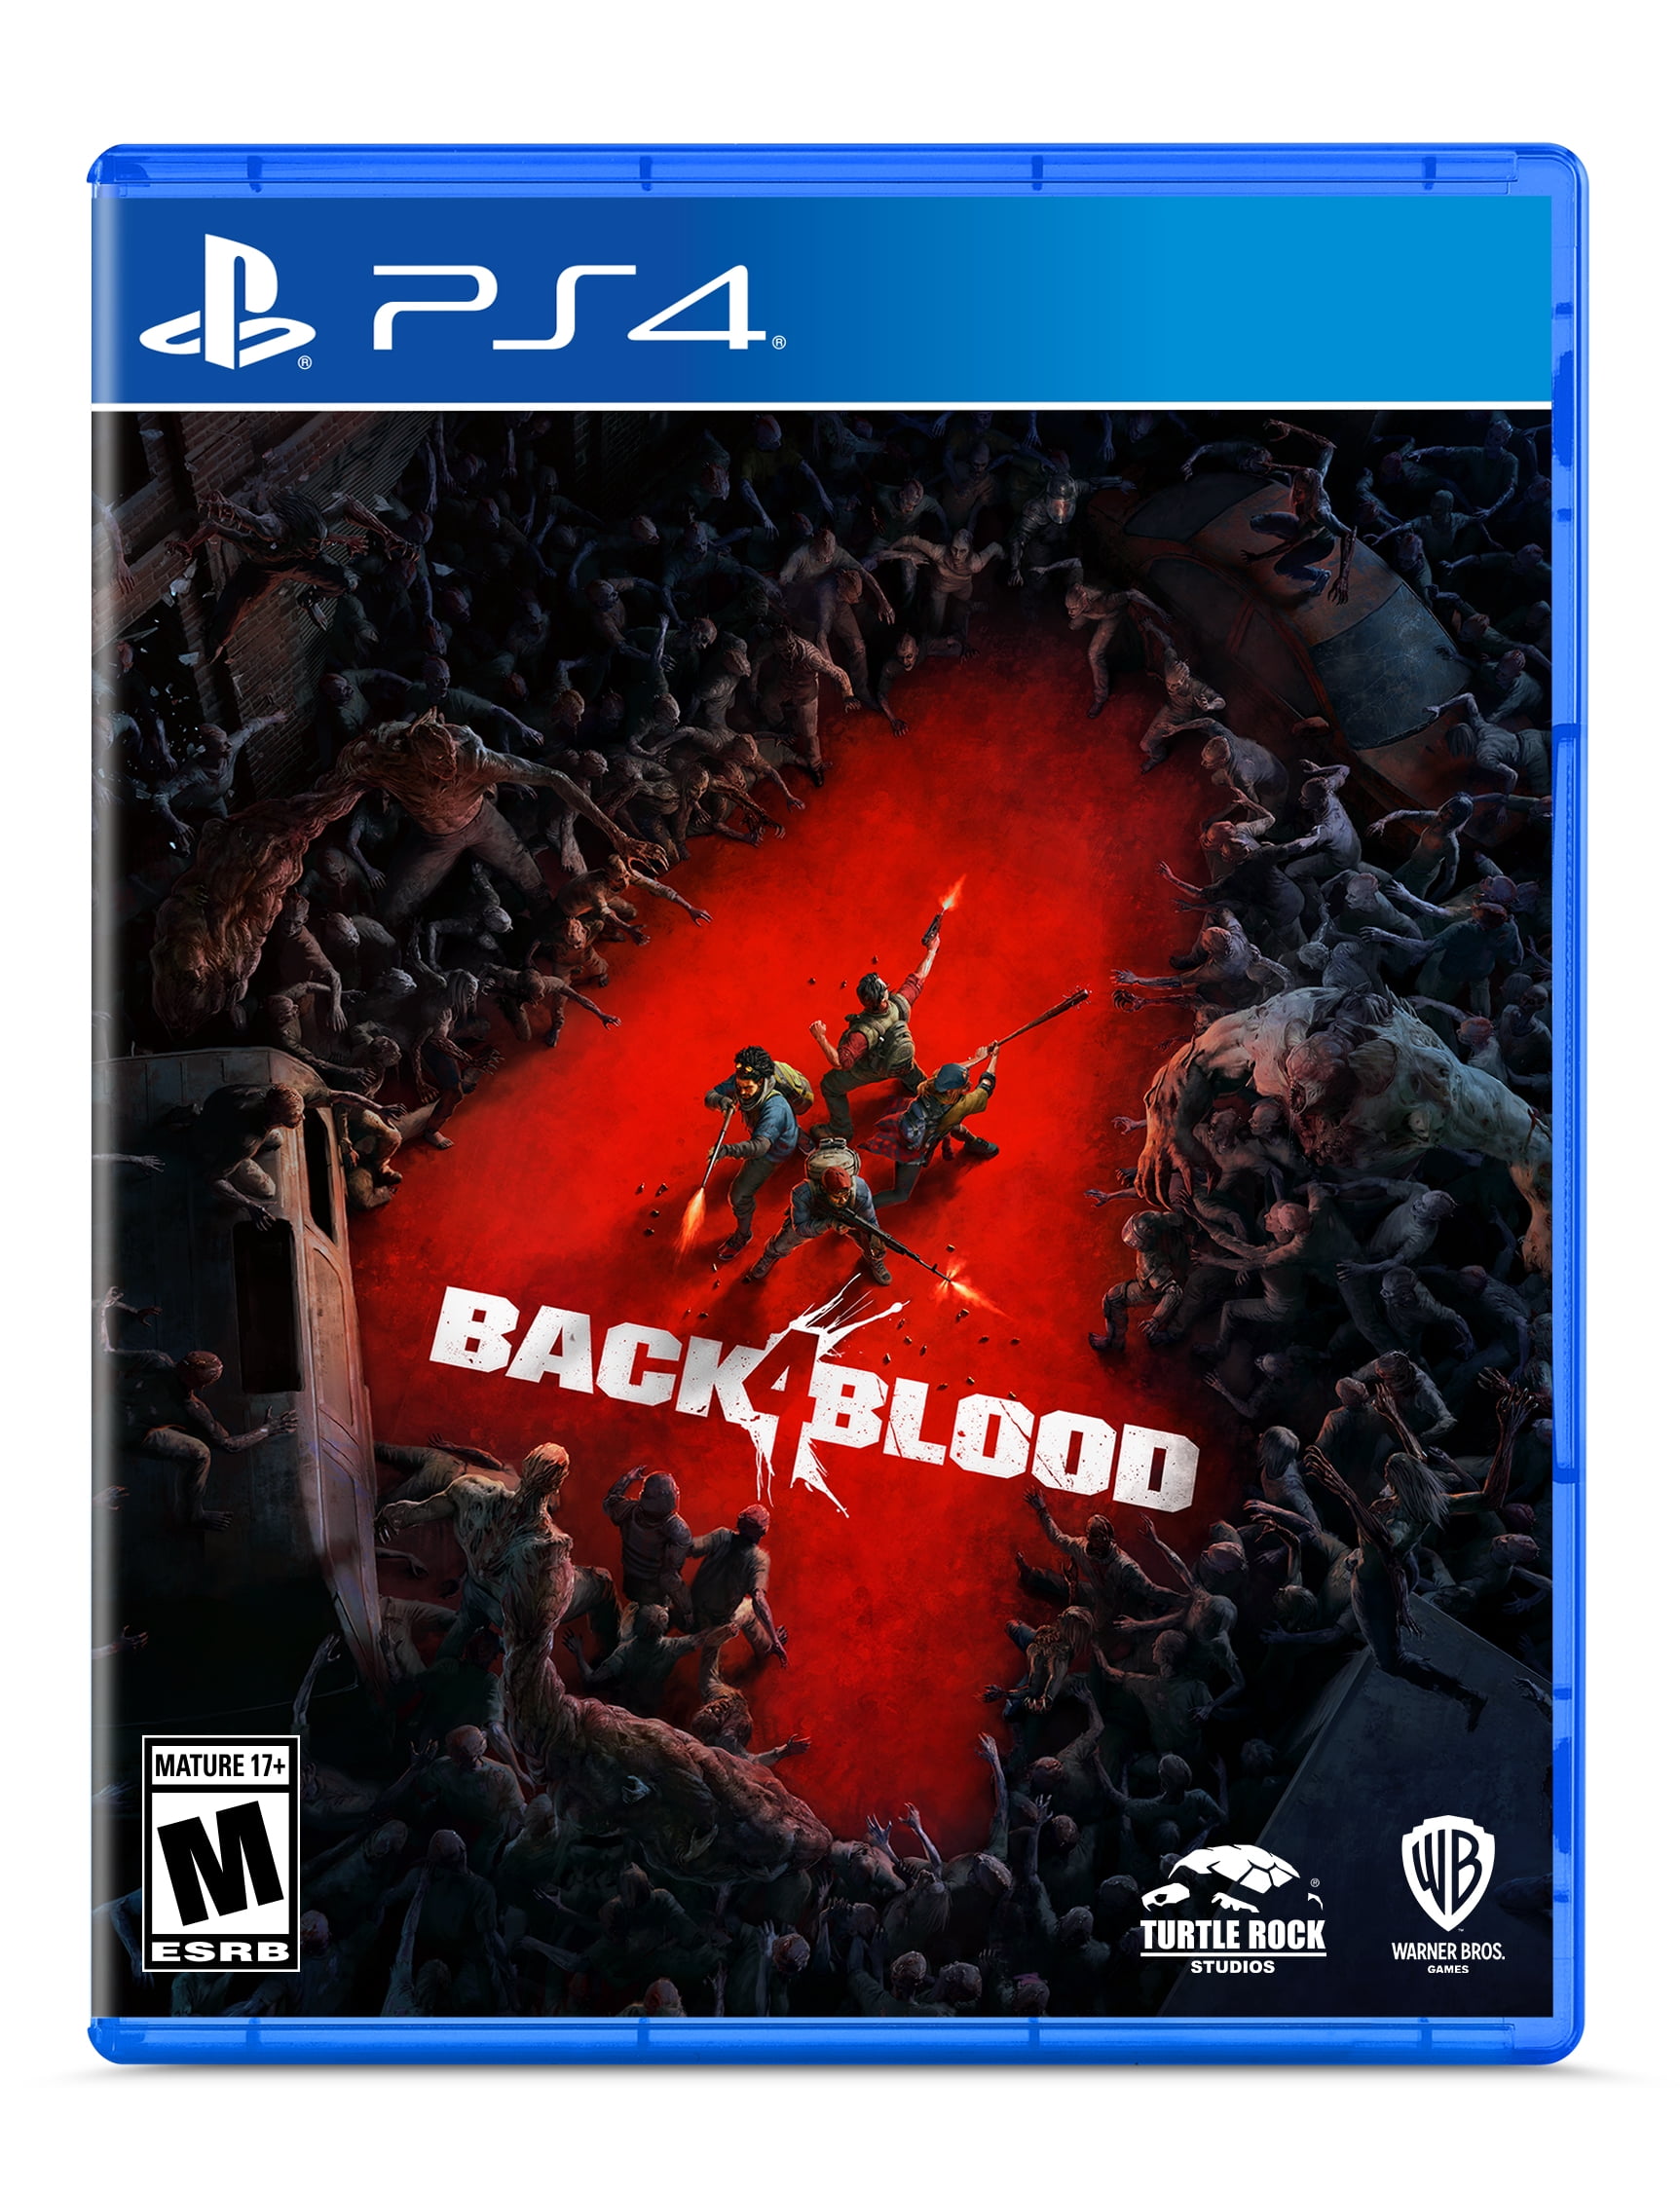 Is Back 4 Blood the co-op zombie shooter we've been waiting for